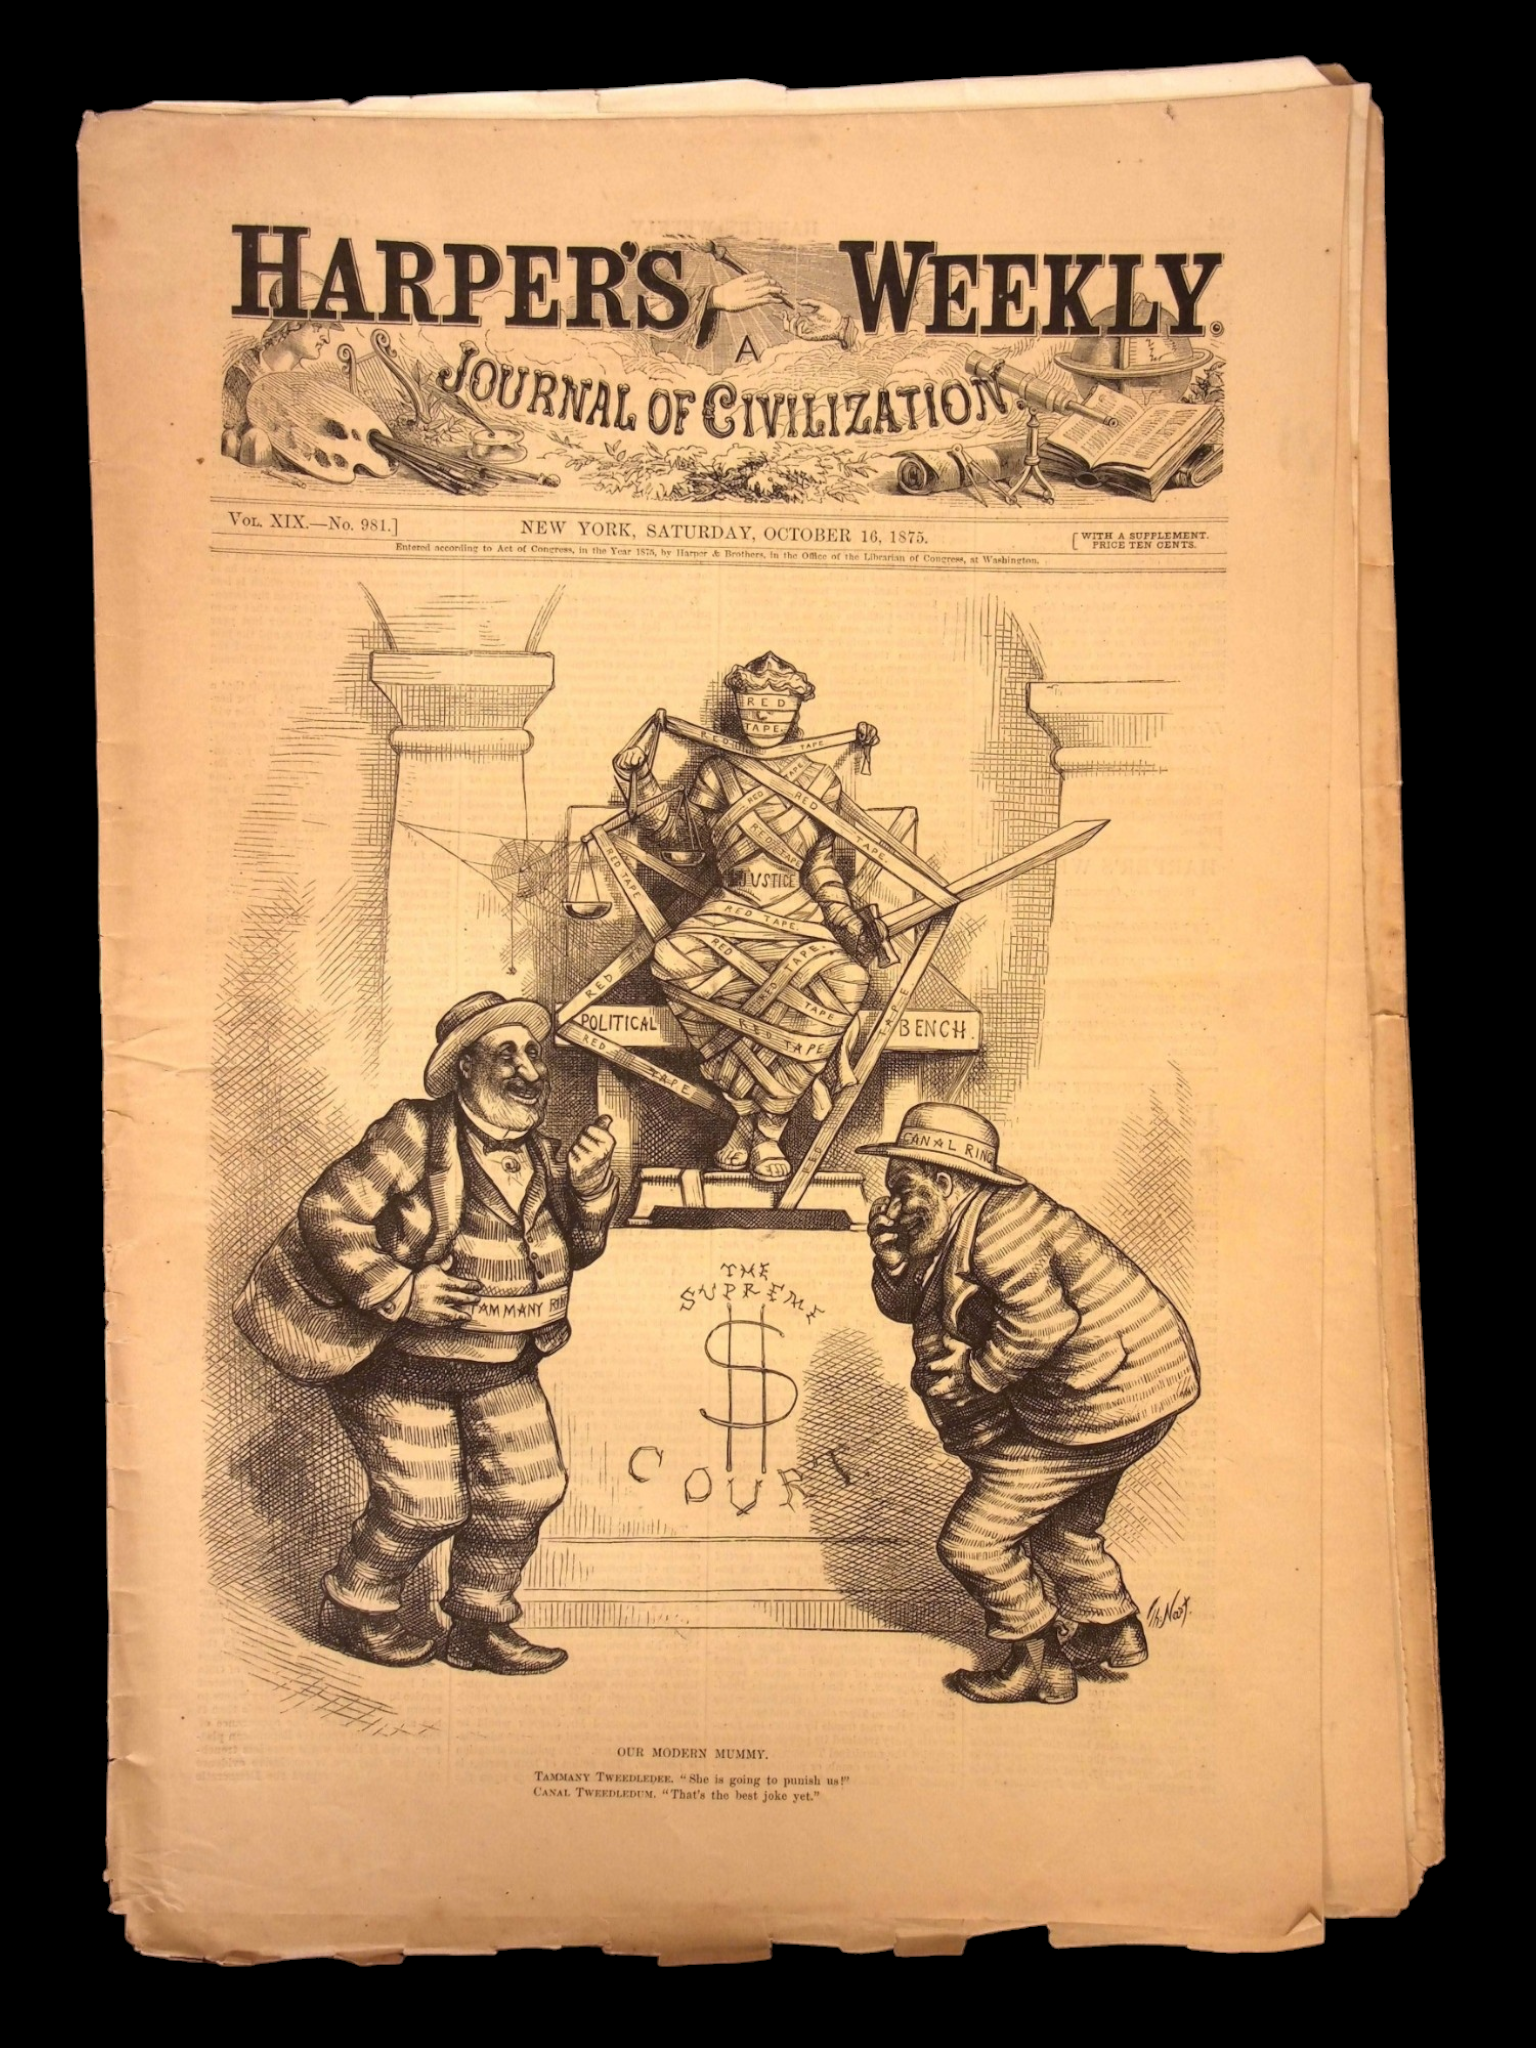 Harper's Weekly: Shooting Competition, "The Deserter," Arctic Expedition  — Oct. 16, 1875